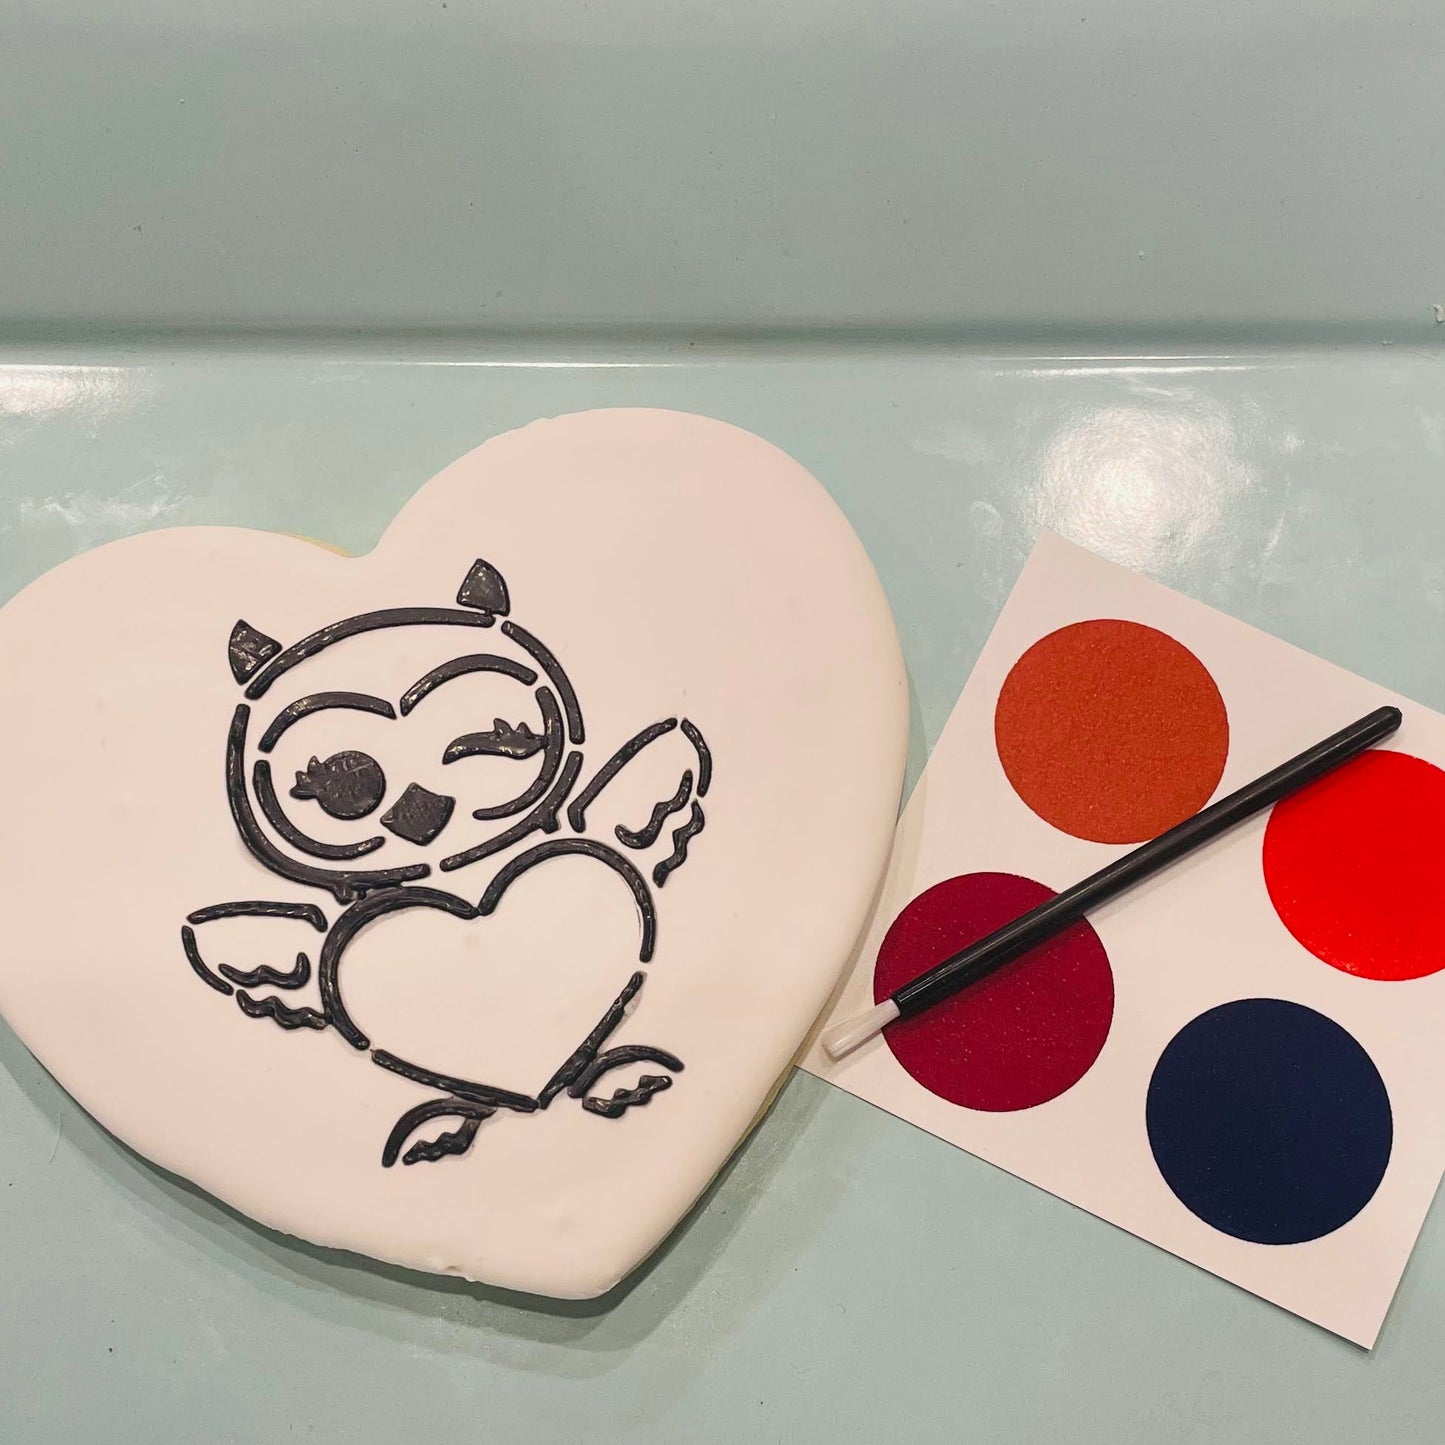 Paint Your Own Cookie Owl